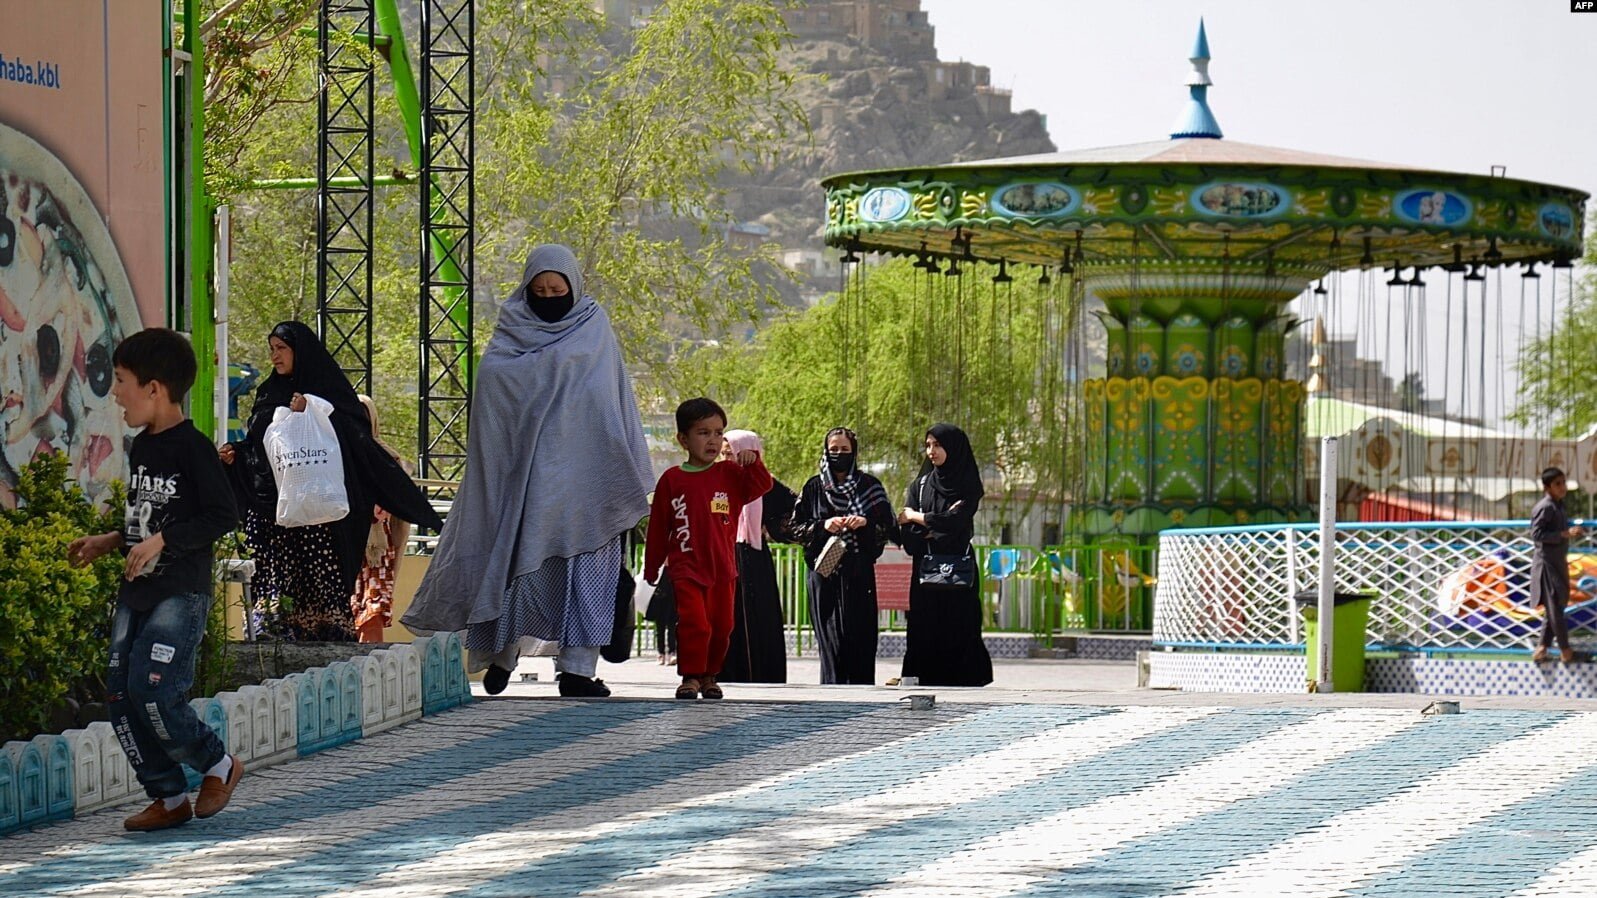 The Taliban's decree from May 2022, which advises women against unnecessary outings, states that if they must leave their homes, they should be accompanied by a Mahram—a male family member as per Islamic tradition.